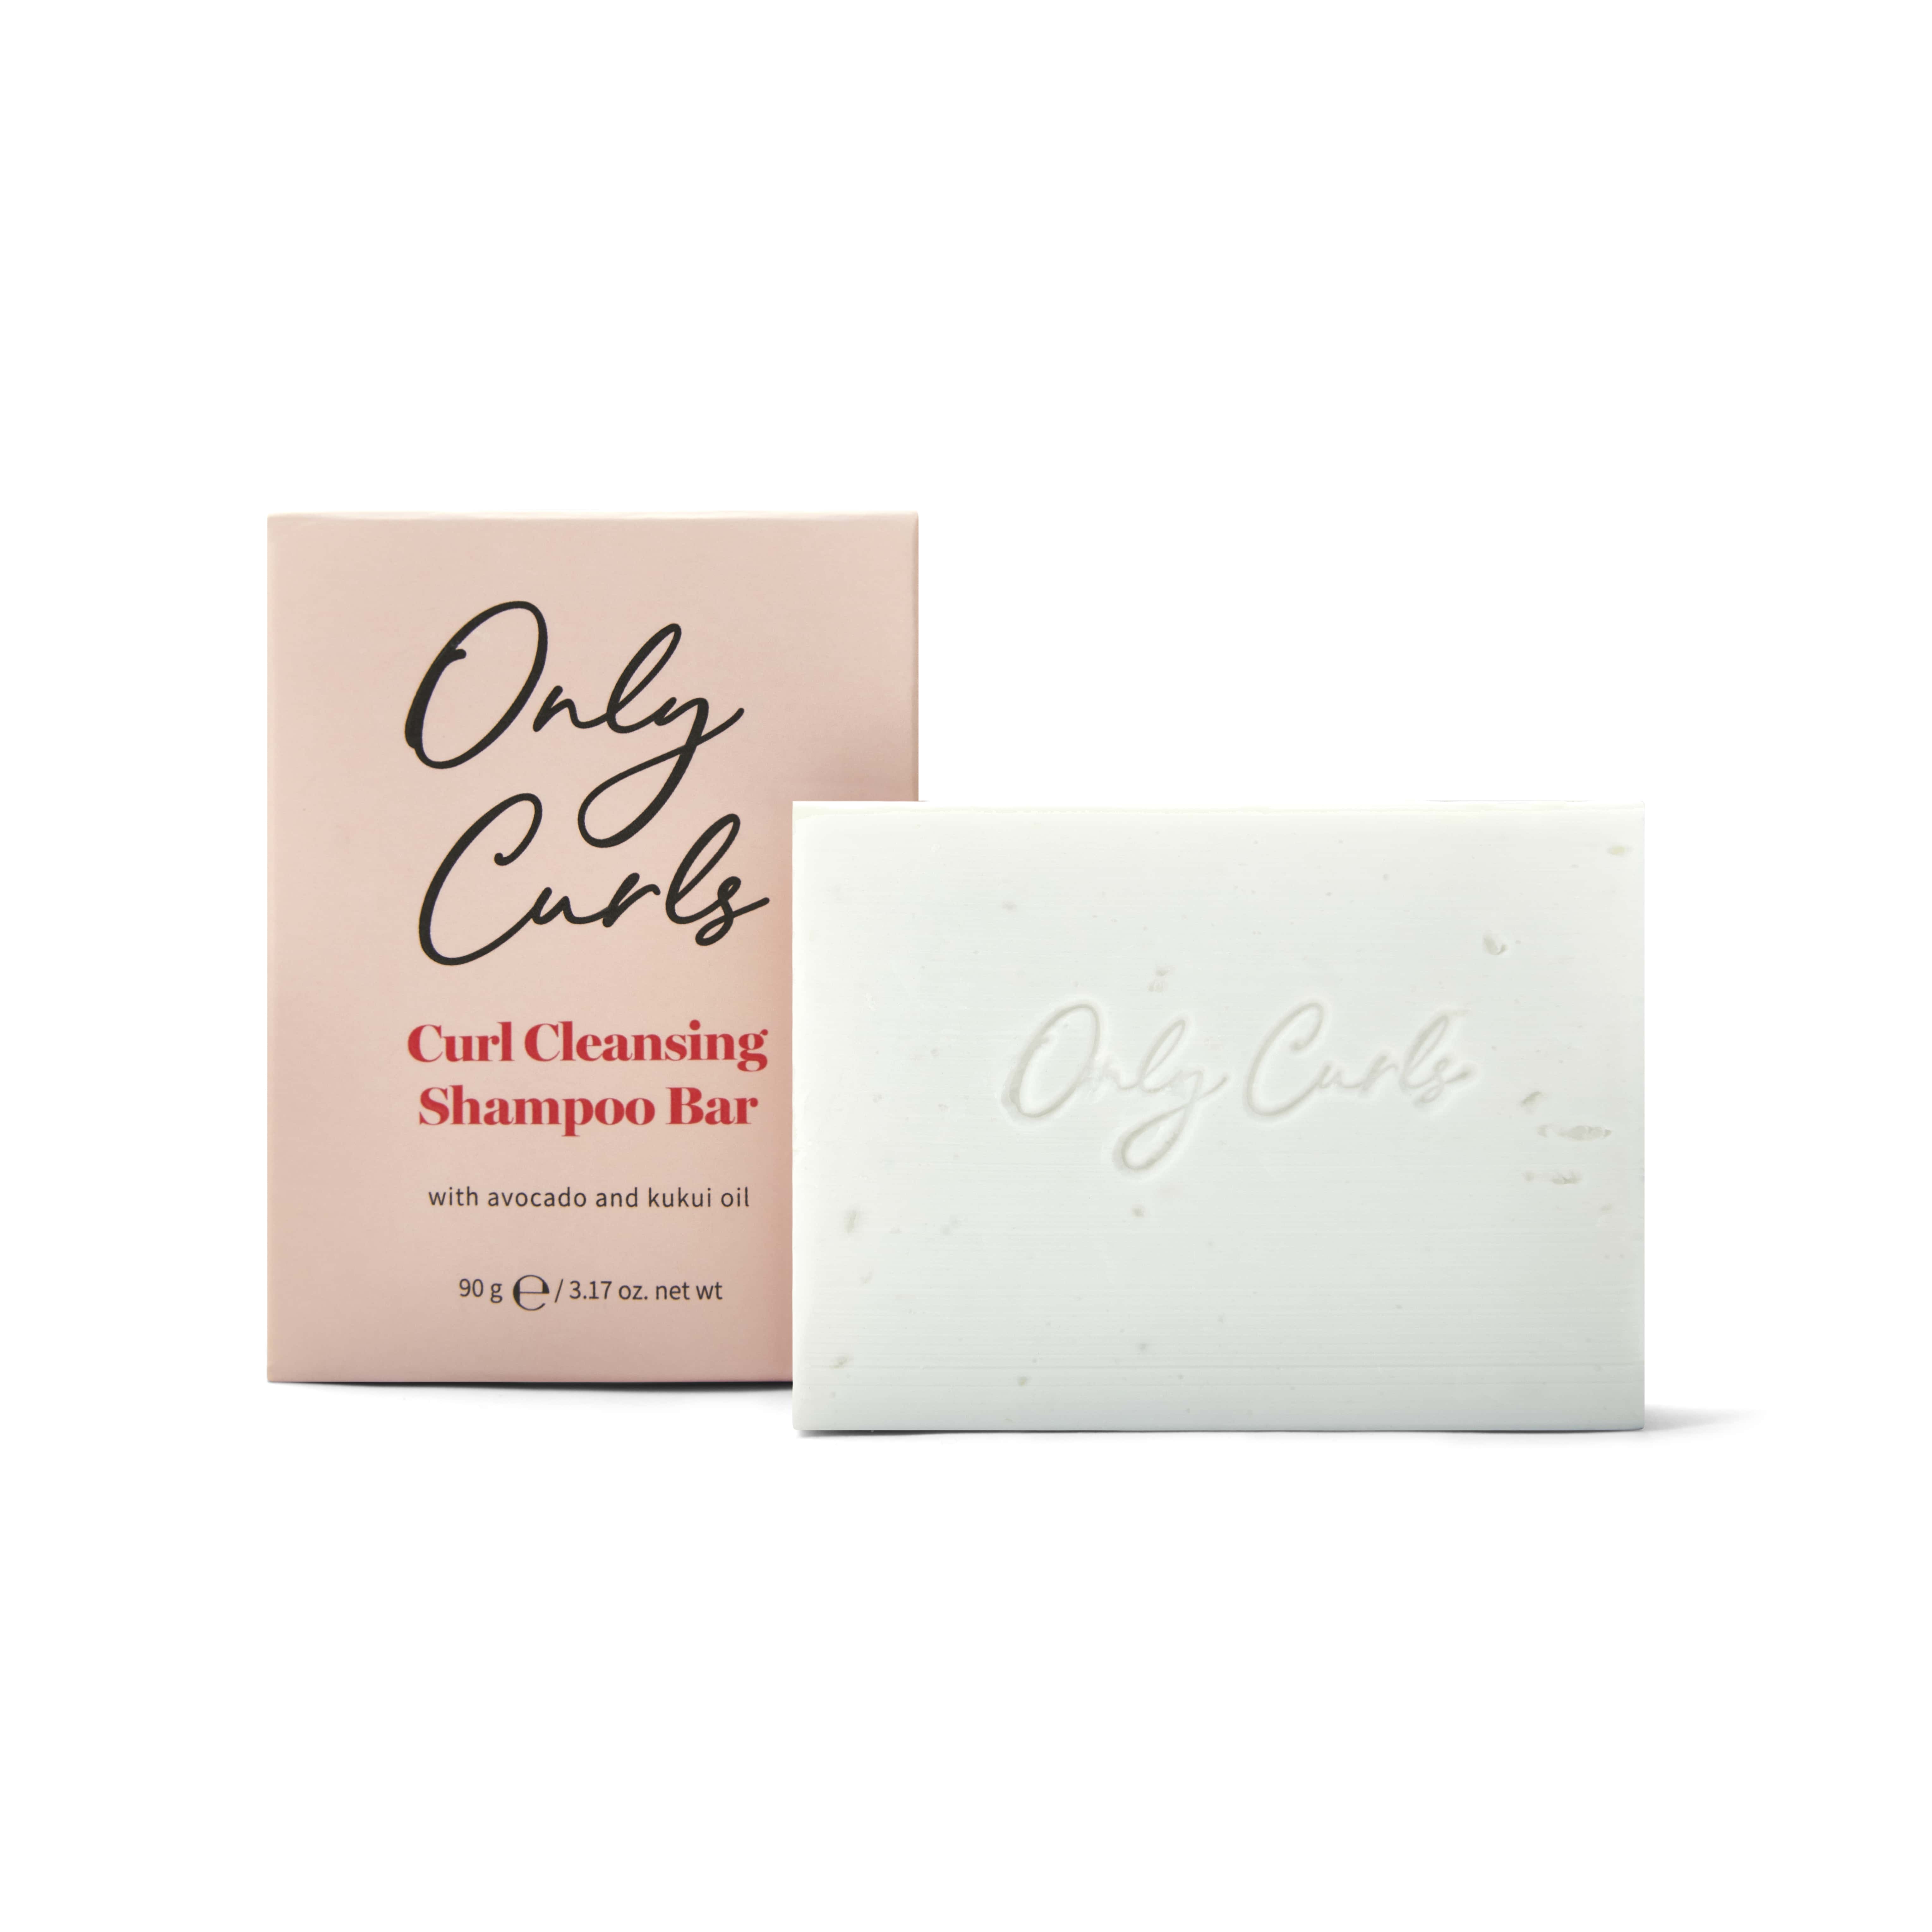 Only Curls Curl Cleansing Shampoo Bar, World Vegan Day beauty swaps